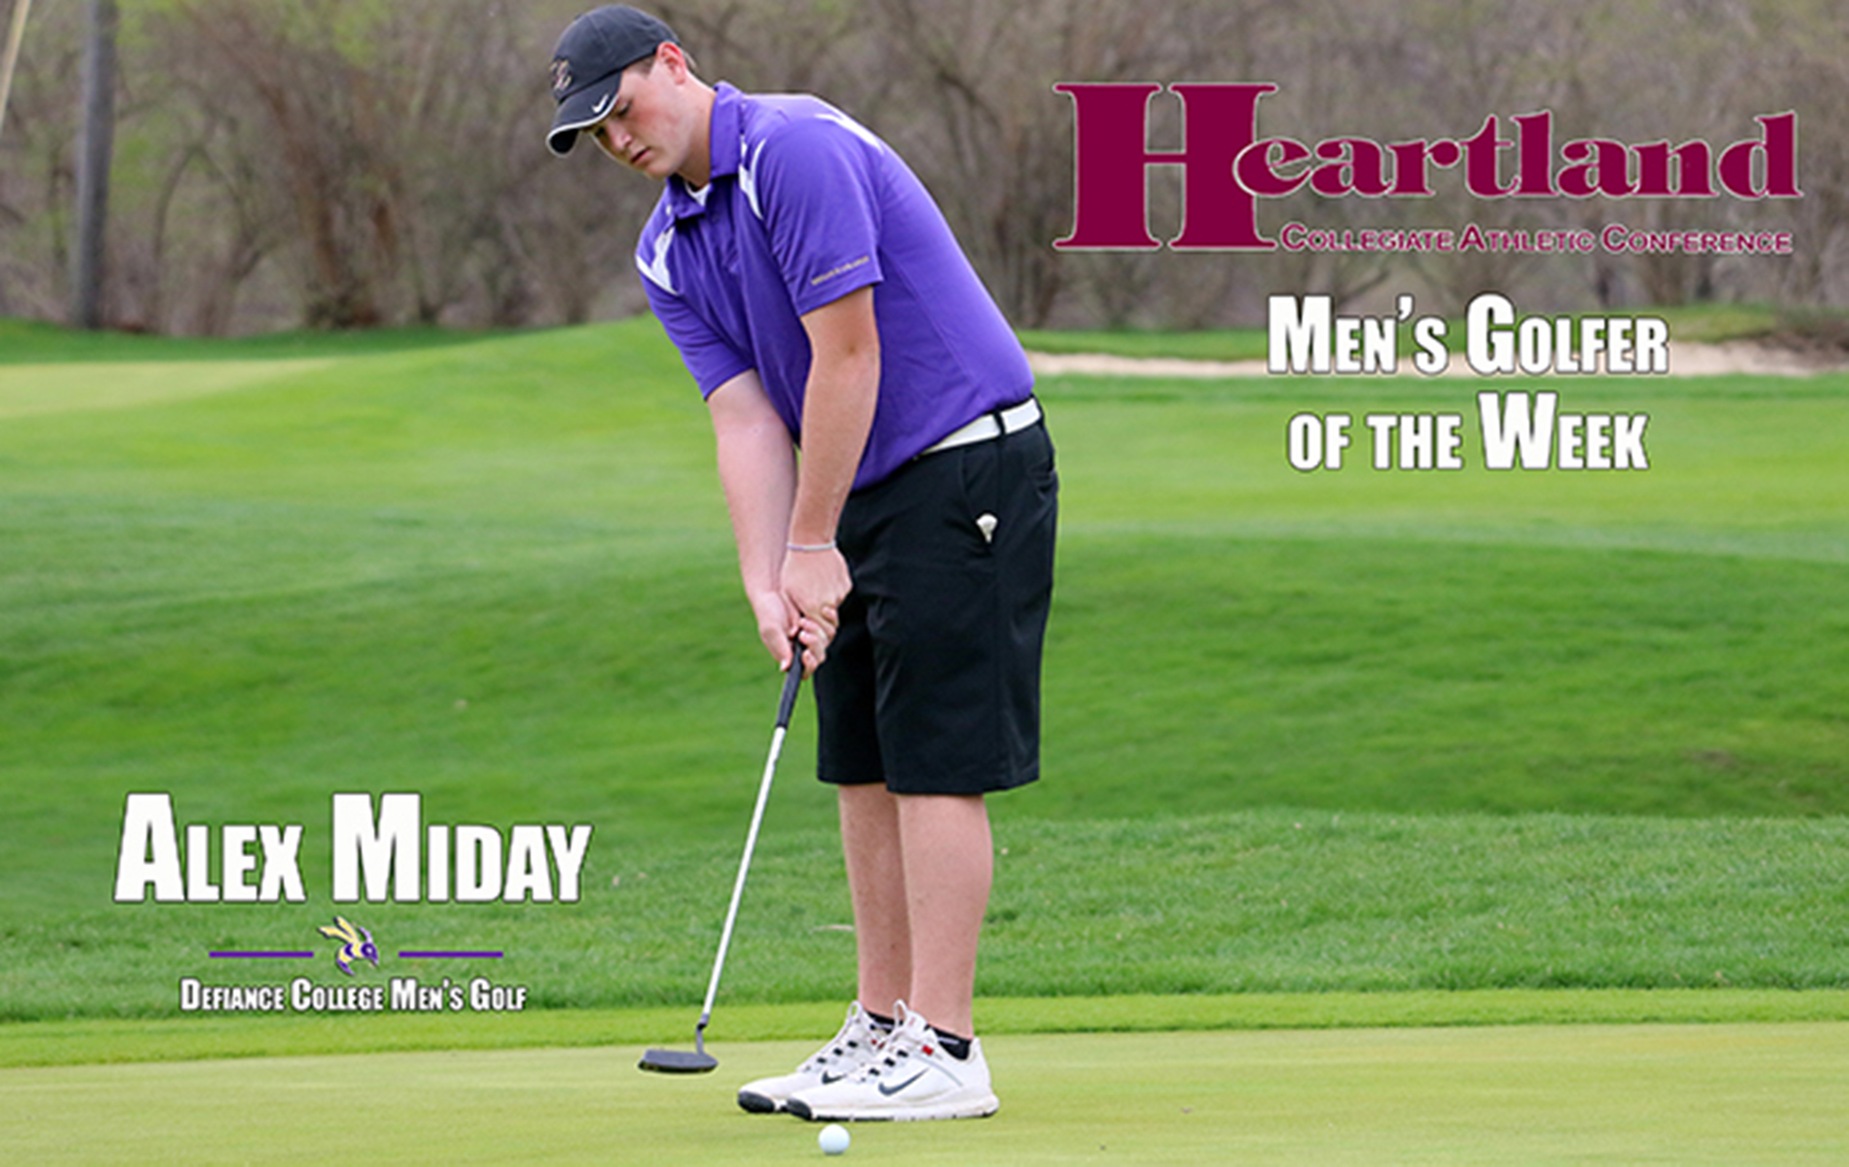 DC's Alex Miday Named HCAC Men's Golfer of the Week